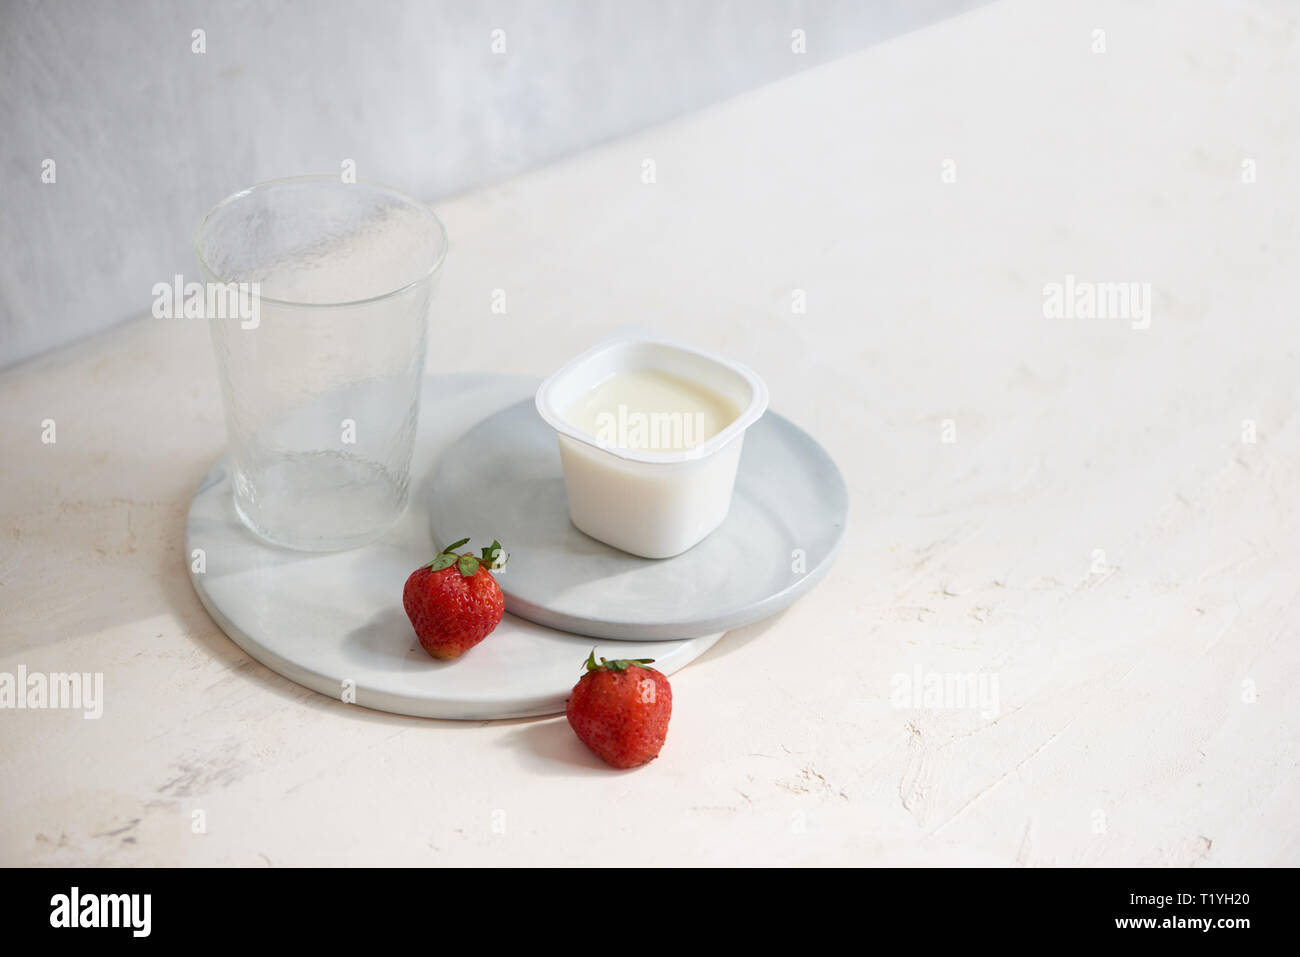 Download Fruit Yogurt In Plastic Container With One Strawberry On White Background Stock Photo 242165896 Alamy PSD Mockup Templates